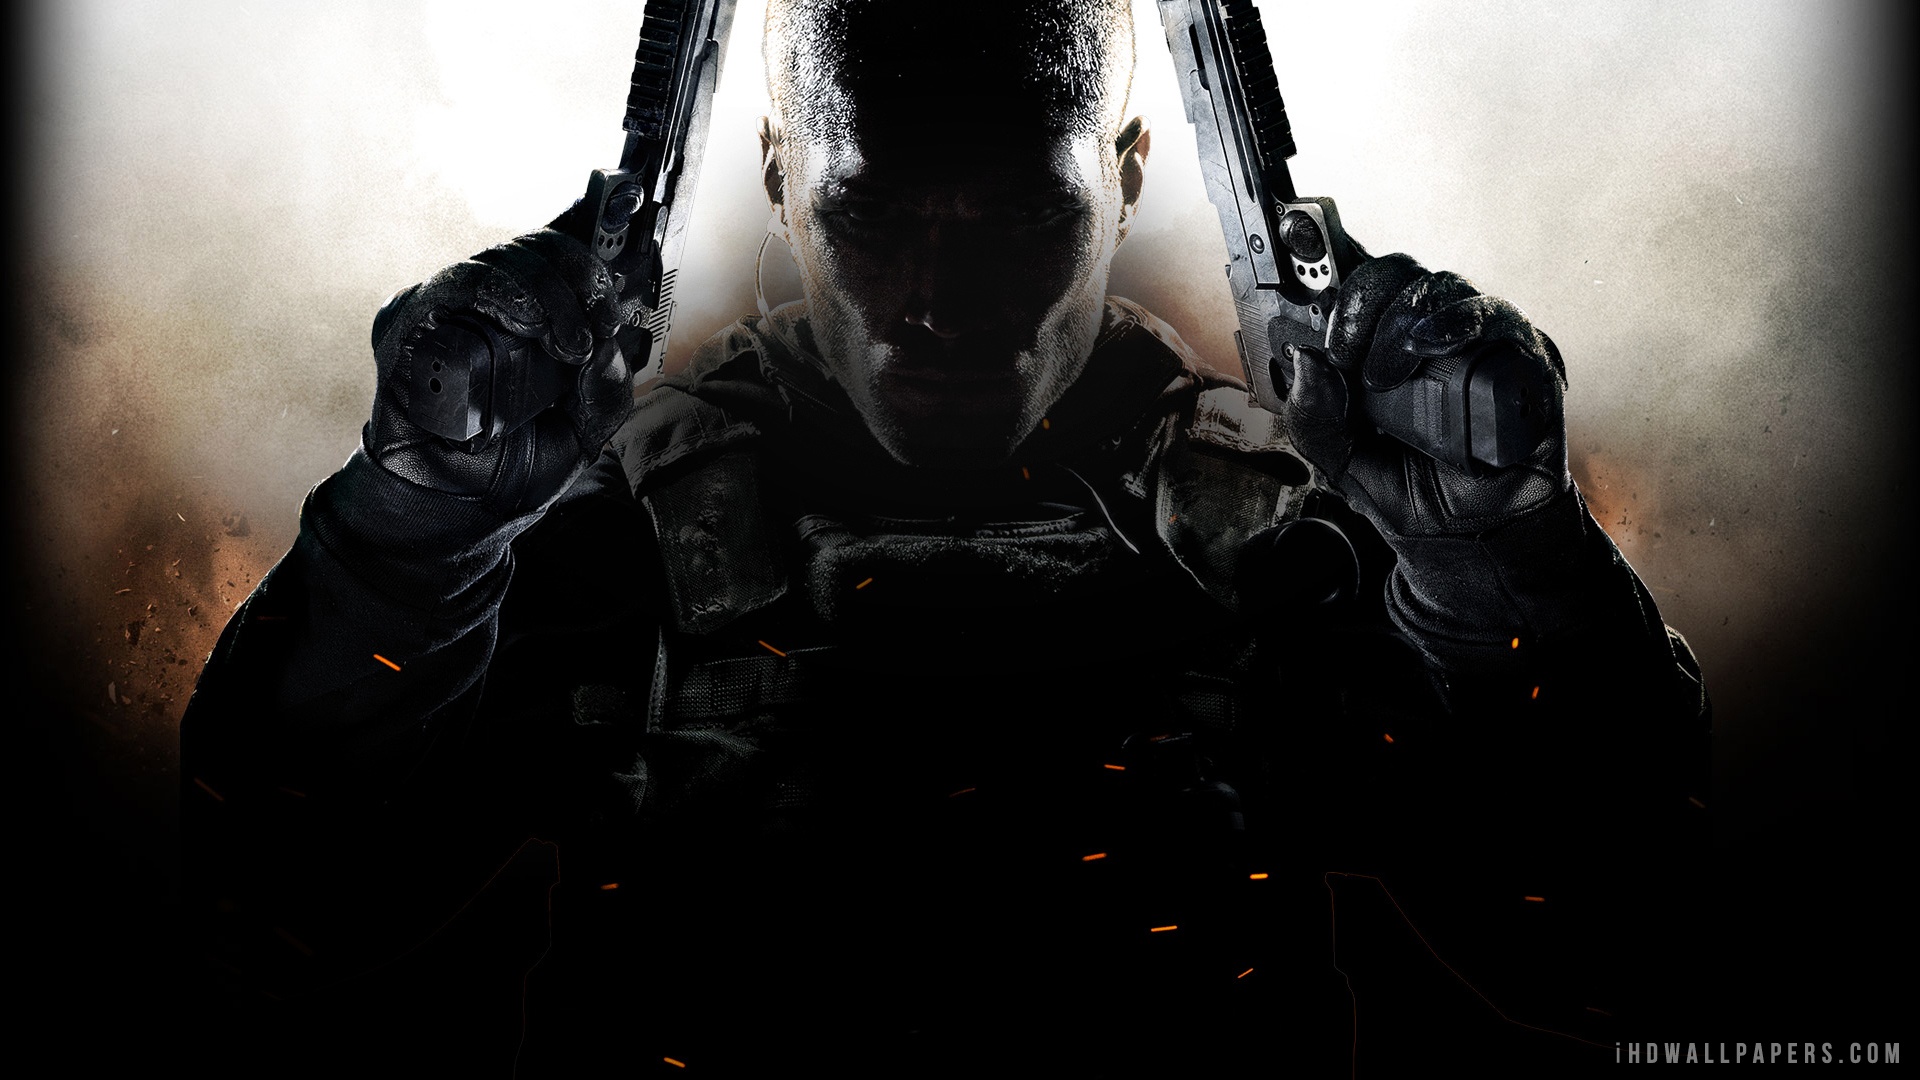 Download hd wallpapers of 600807-Call_of_Duty:_Black_Ops, Call_of_Duty:_Bla...